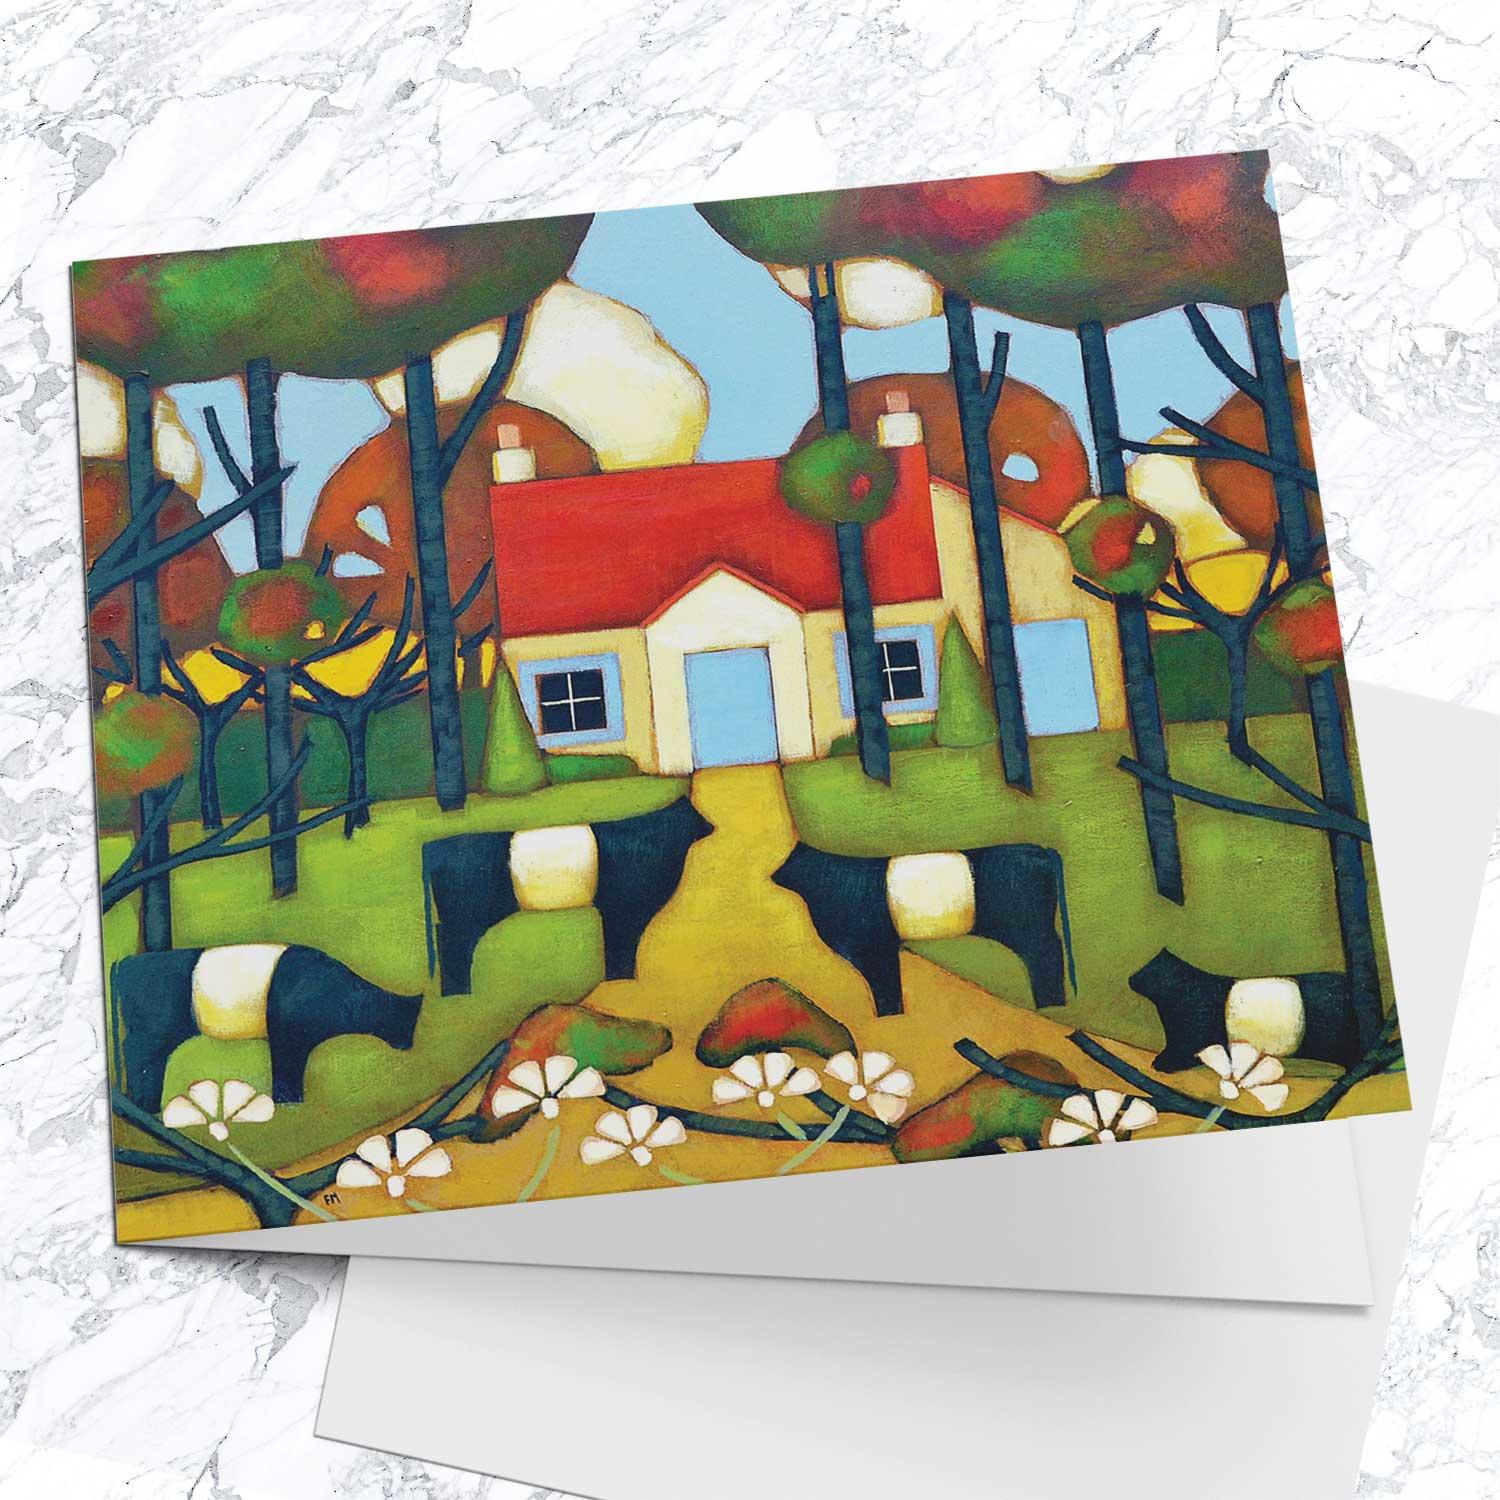 Galloway Autumn Greeting Card from an original painting by artist Fiona Millar